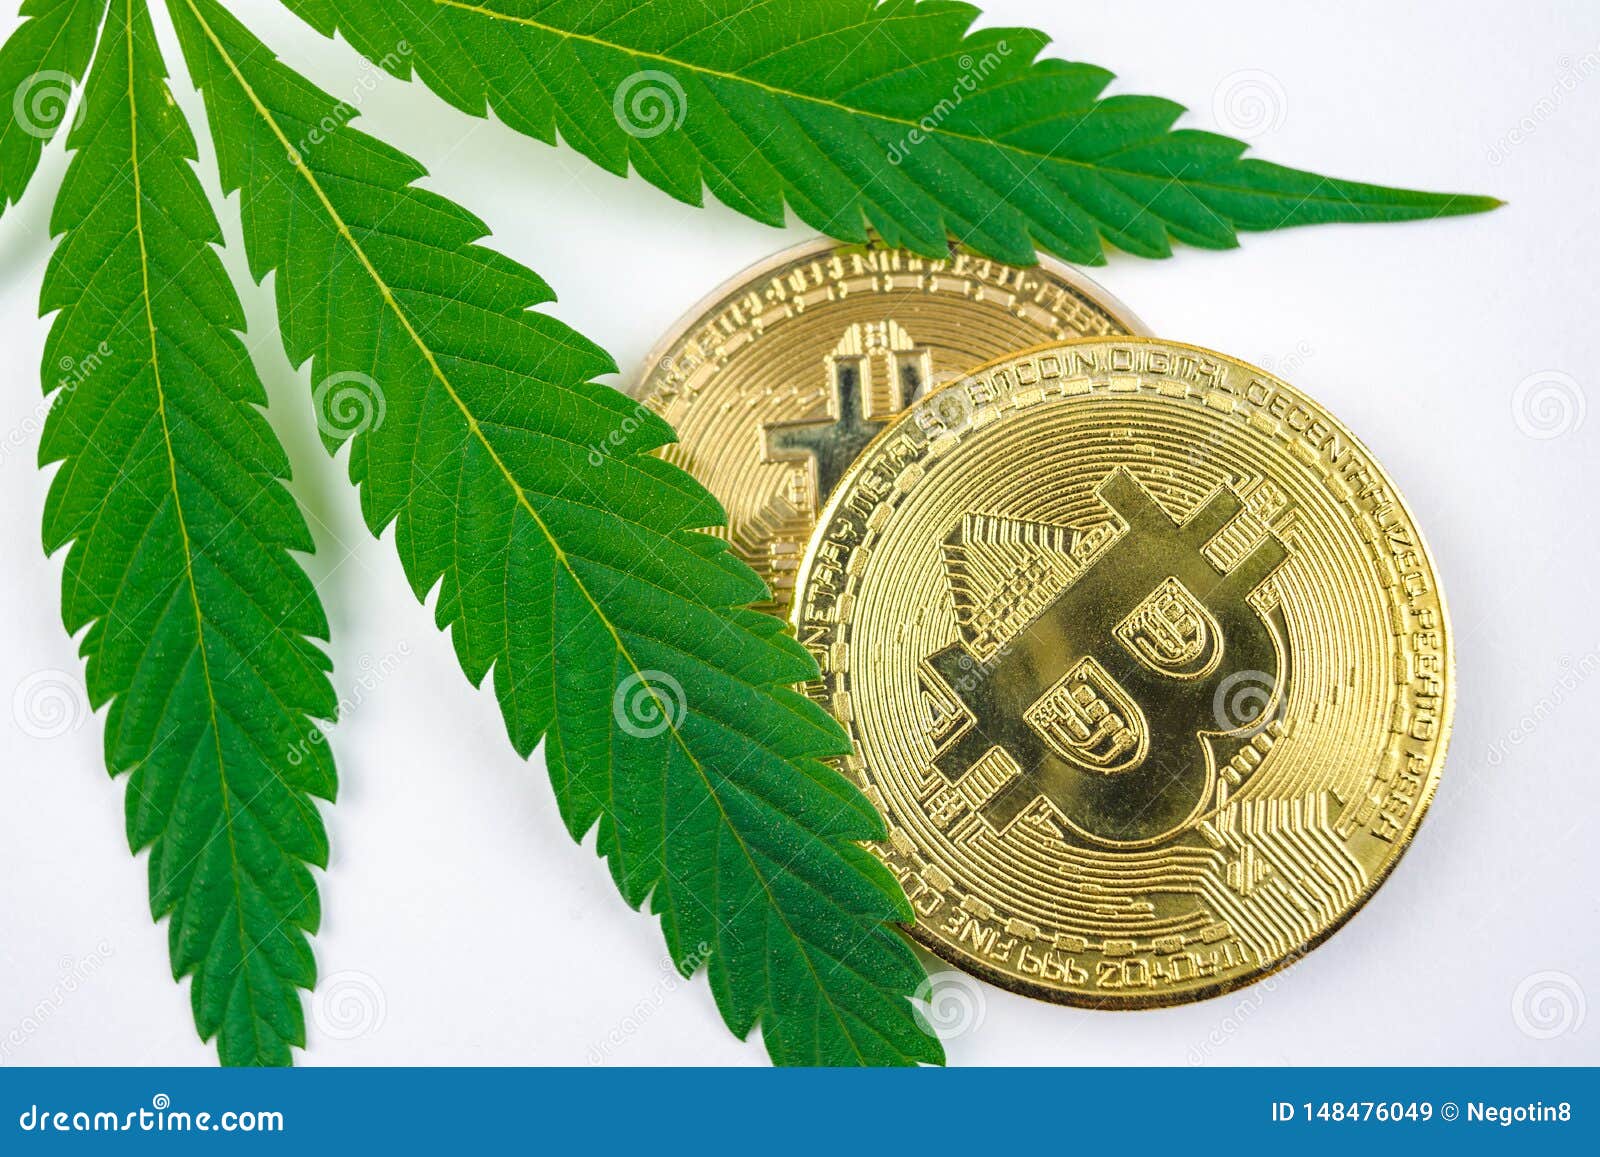 investing in bitcoin currency and cannabis